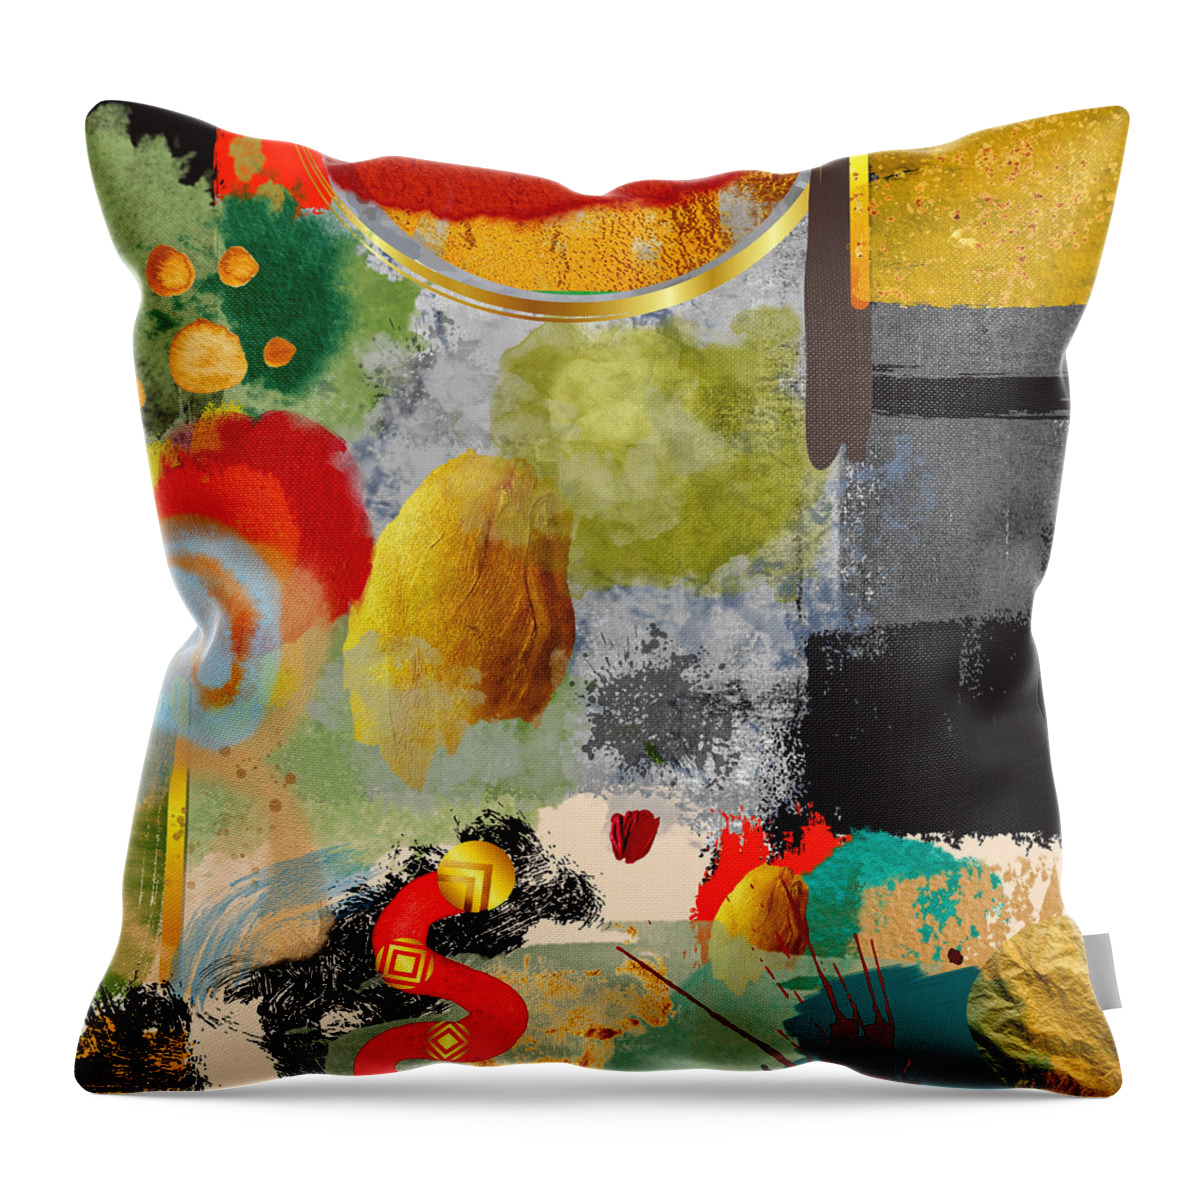 Contemporary Art Throw Pillow featuring the mixed media Hidden in Plain Sight by Canessa Thomas